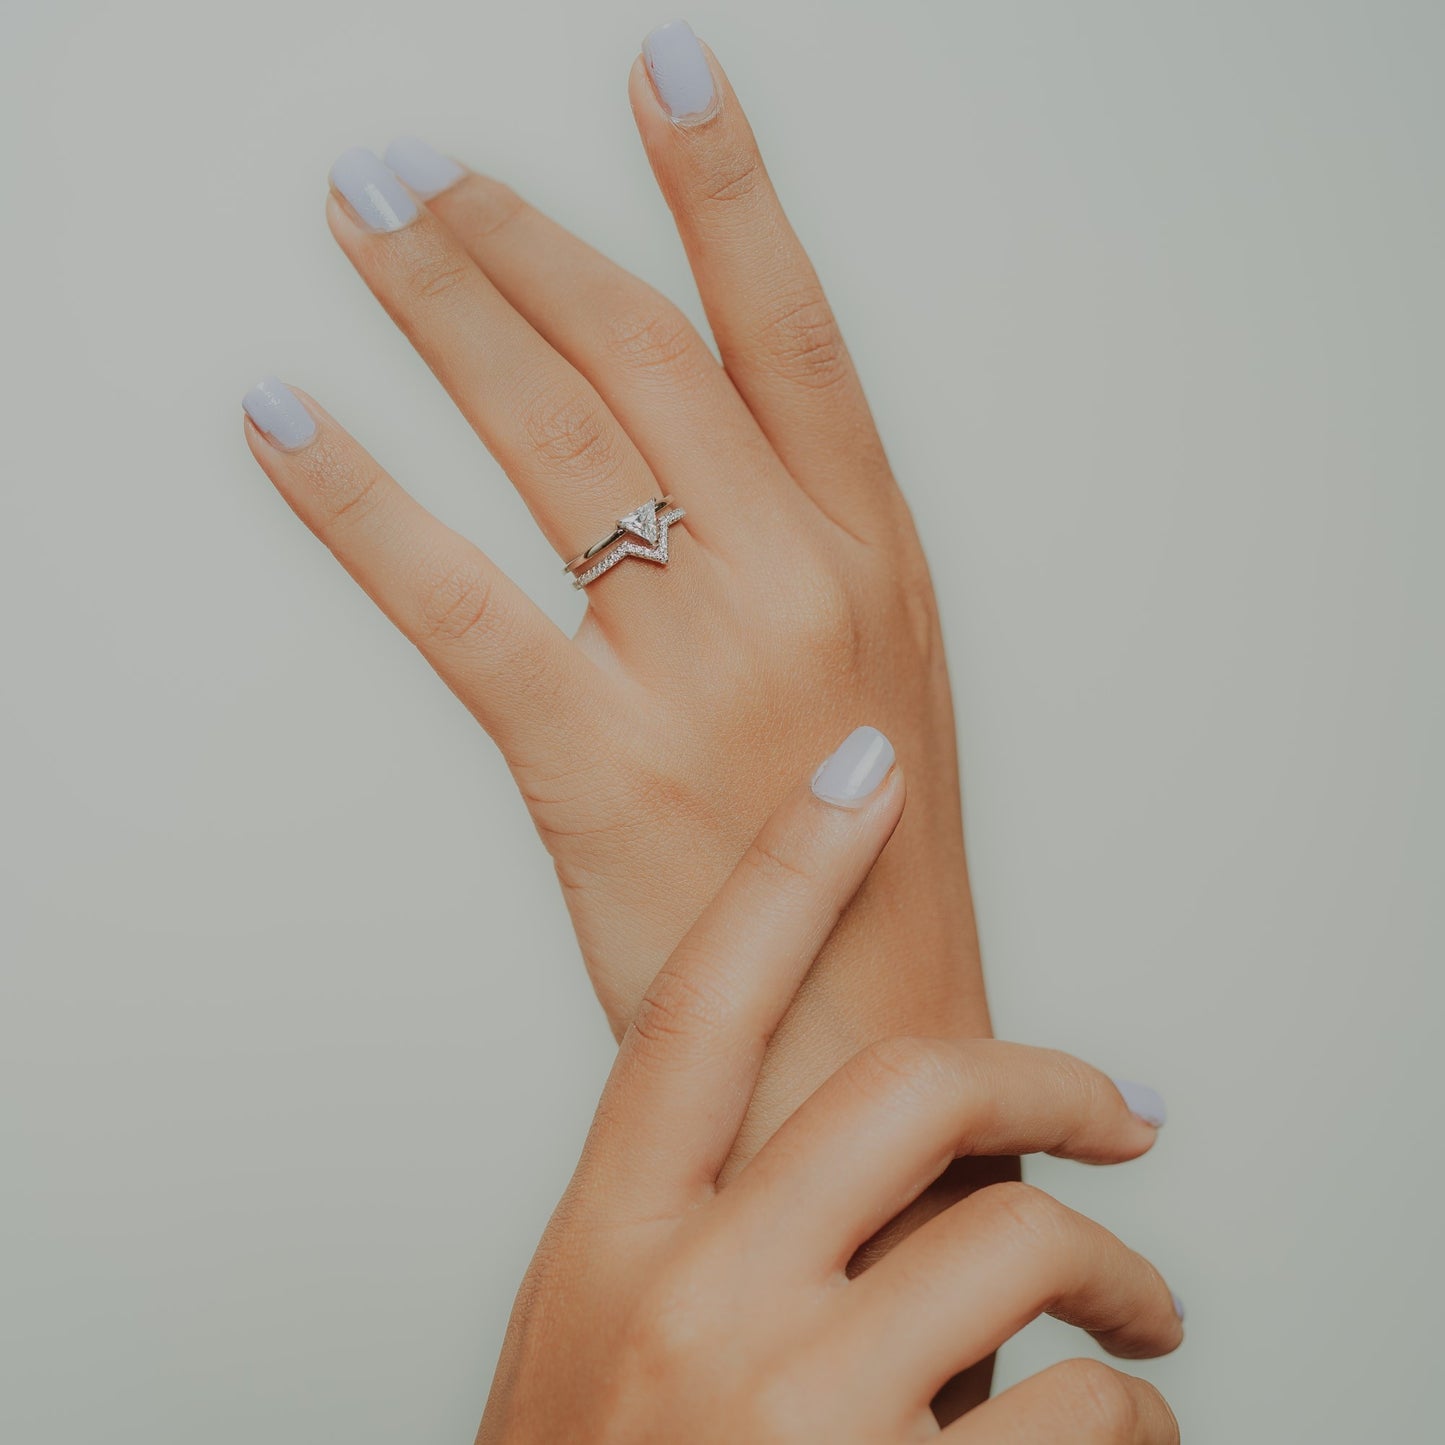 Silver Layered Cupid Arrow Ring